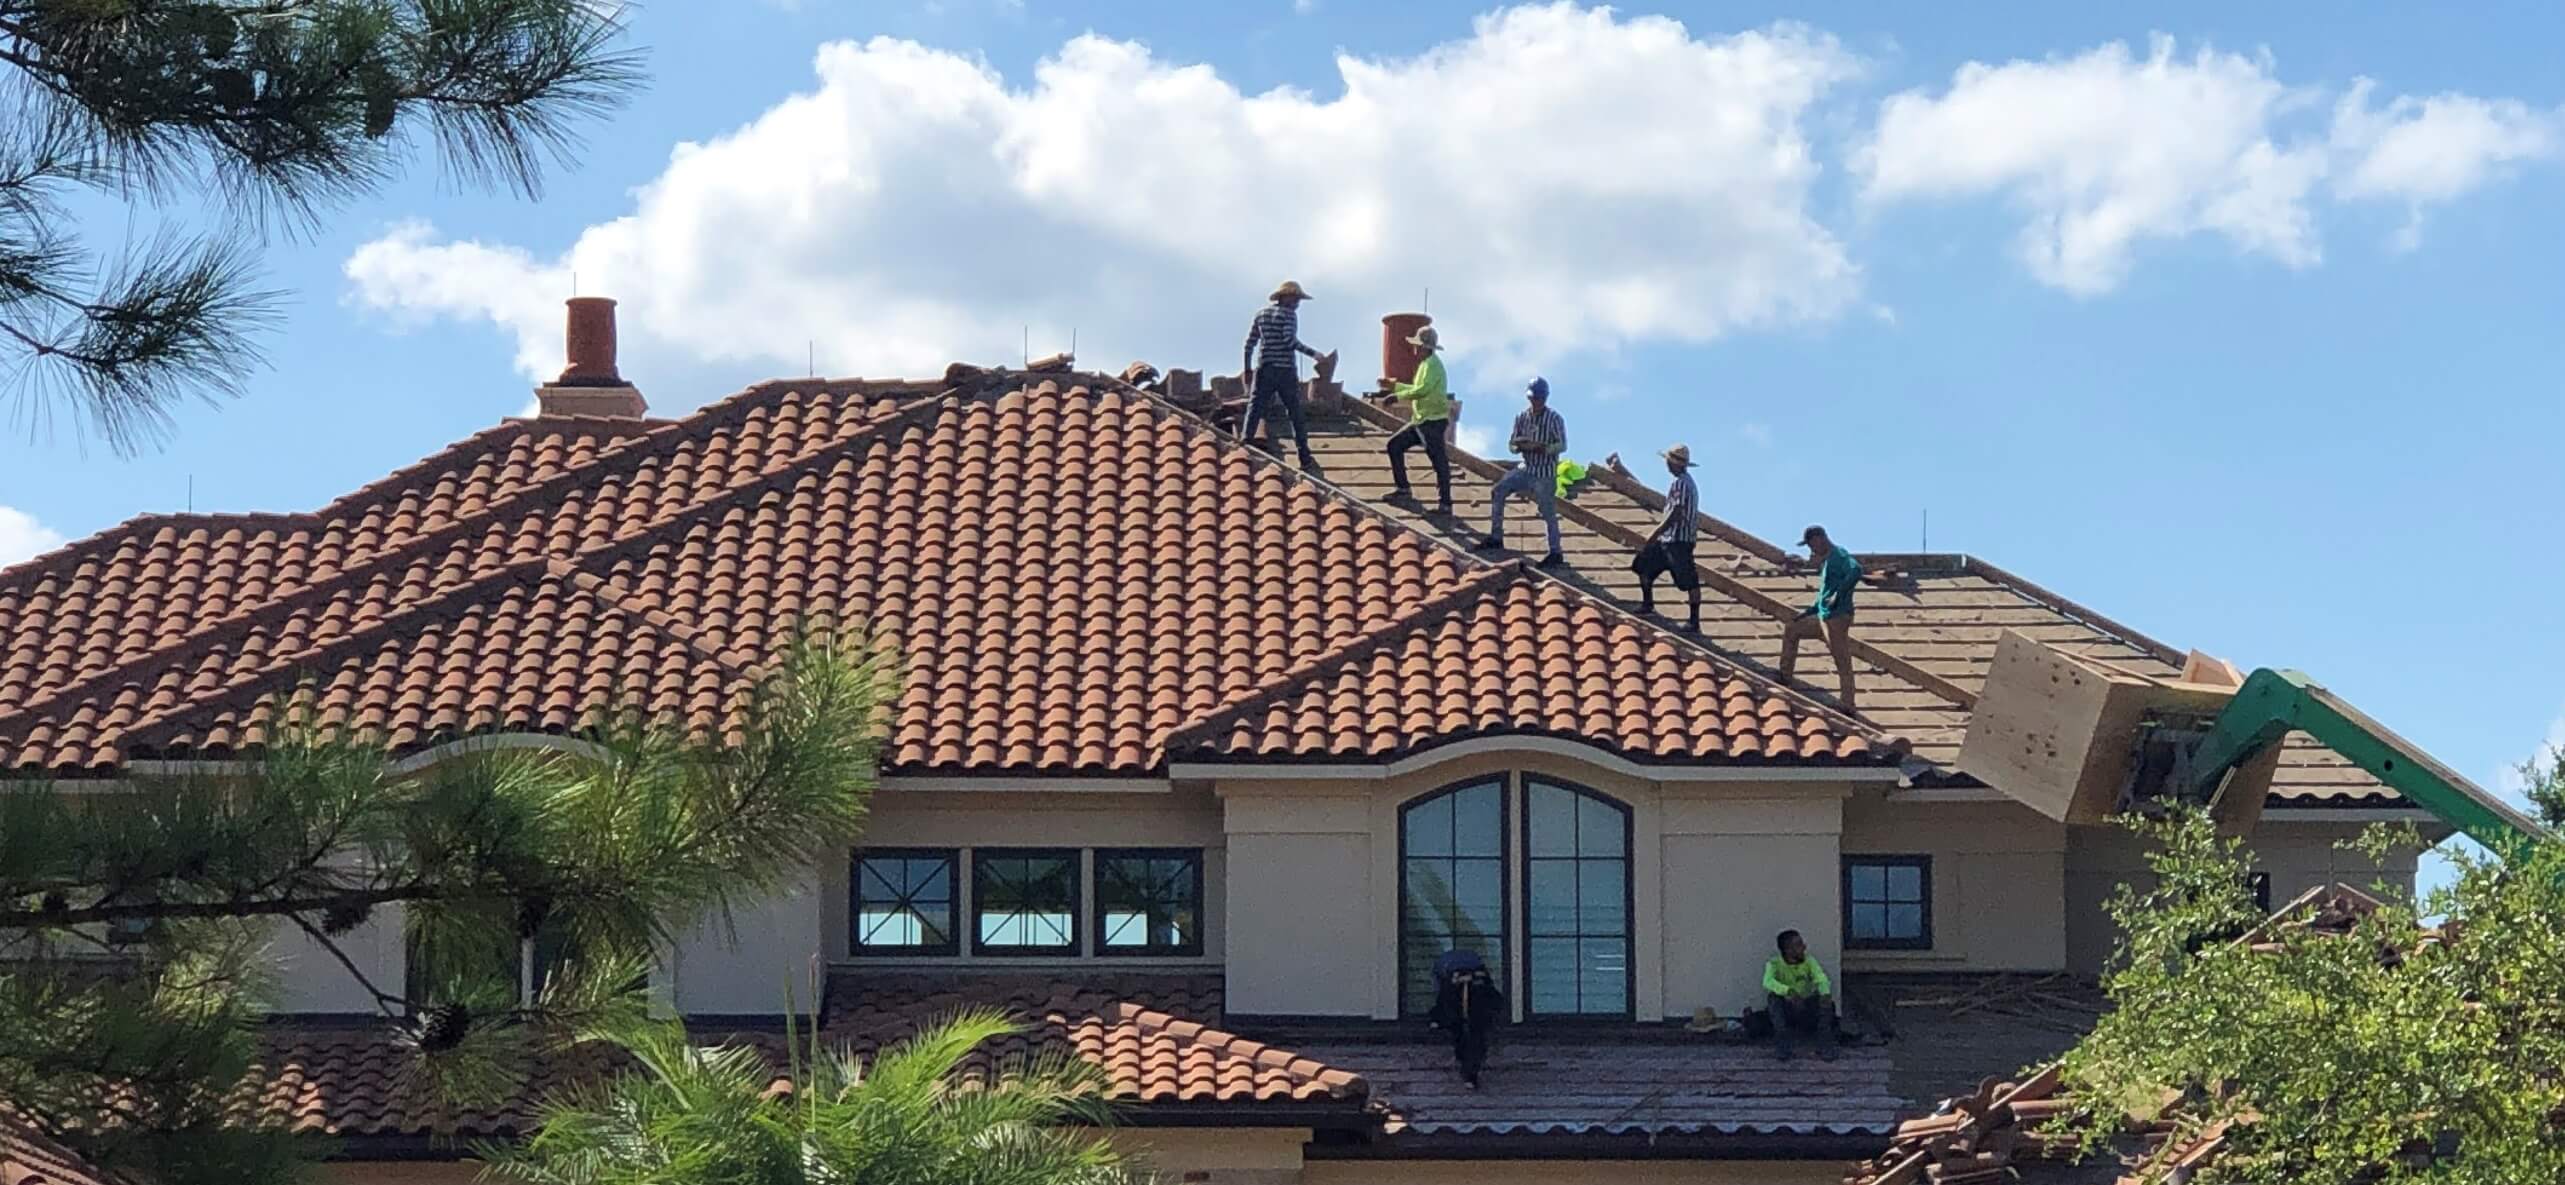 roofers on roof